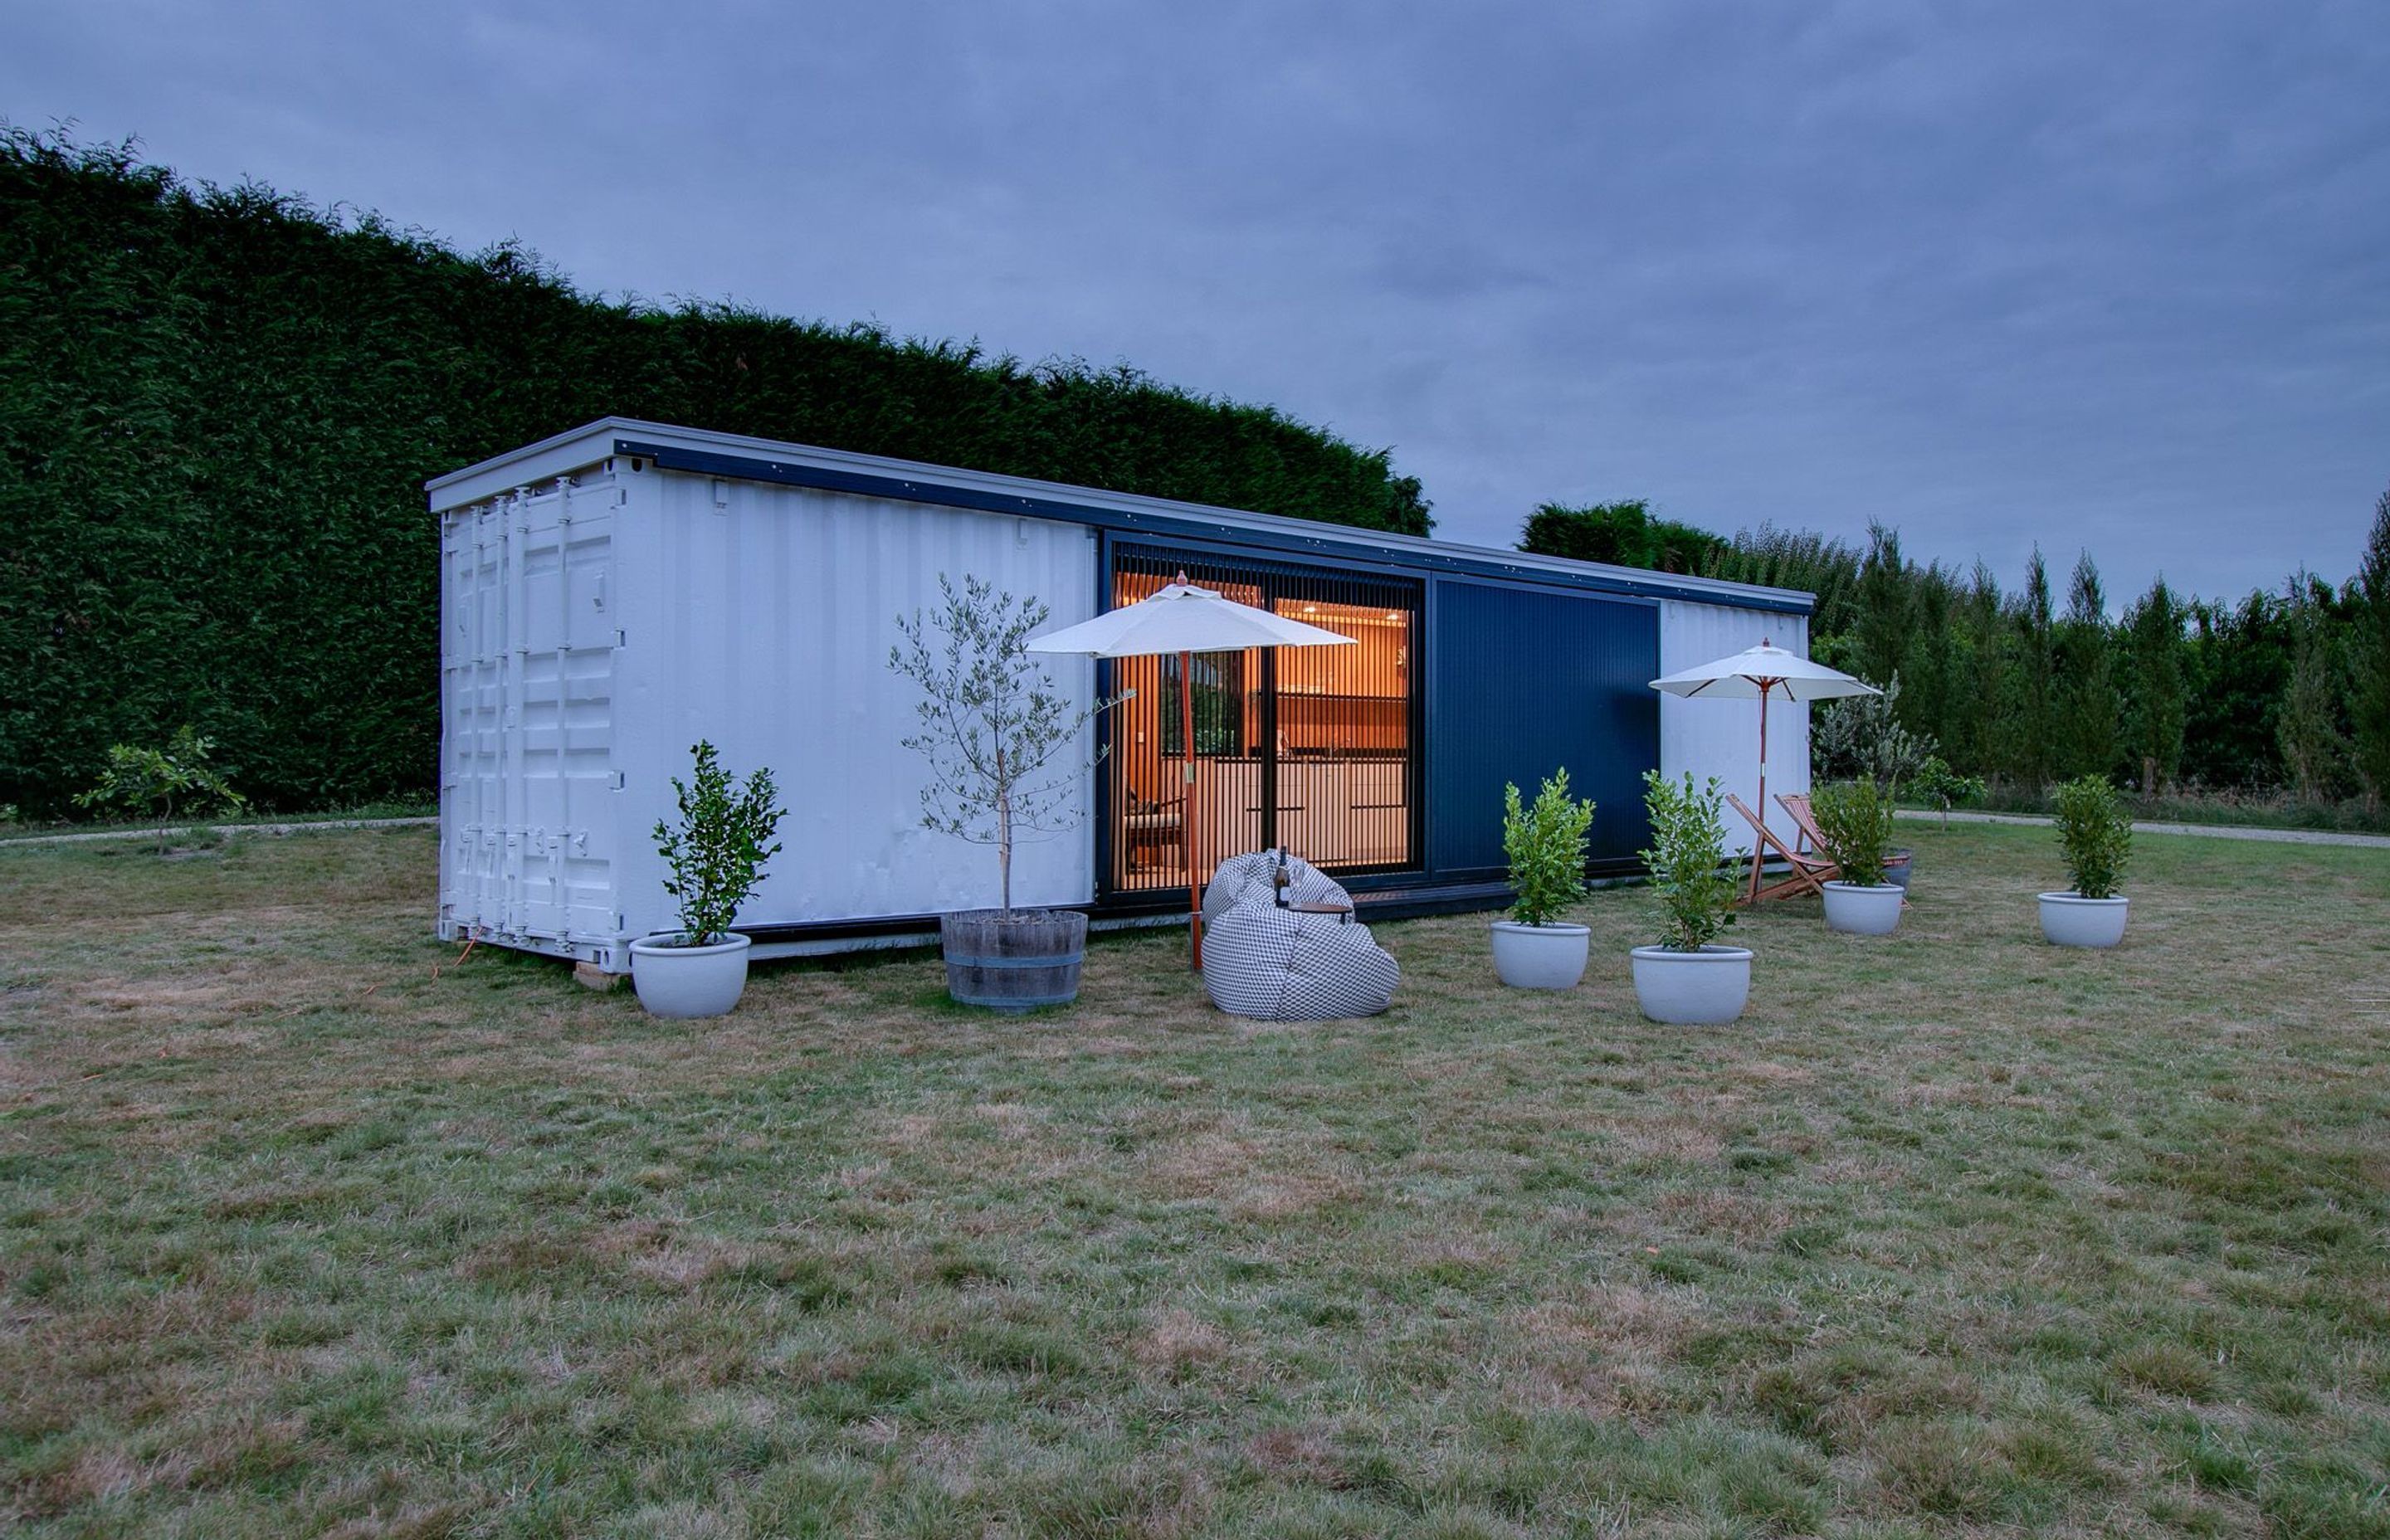 Planted trees, pot plants and outdoor furniture help to make the container dwelling more like a home.